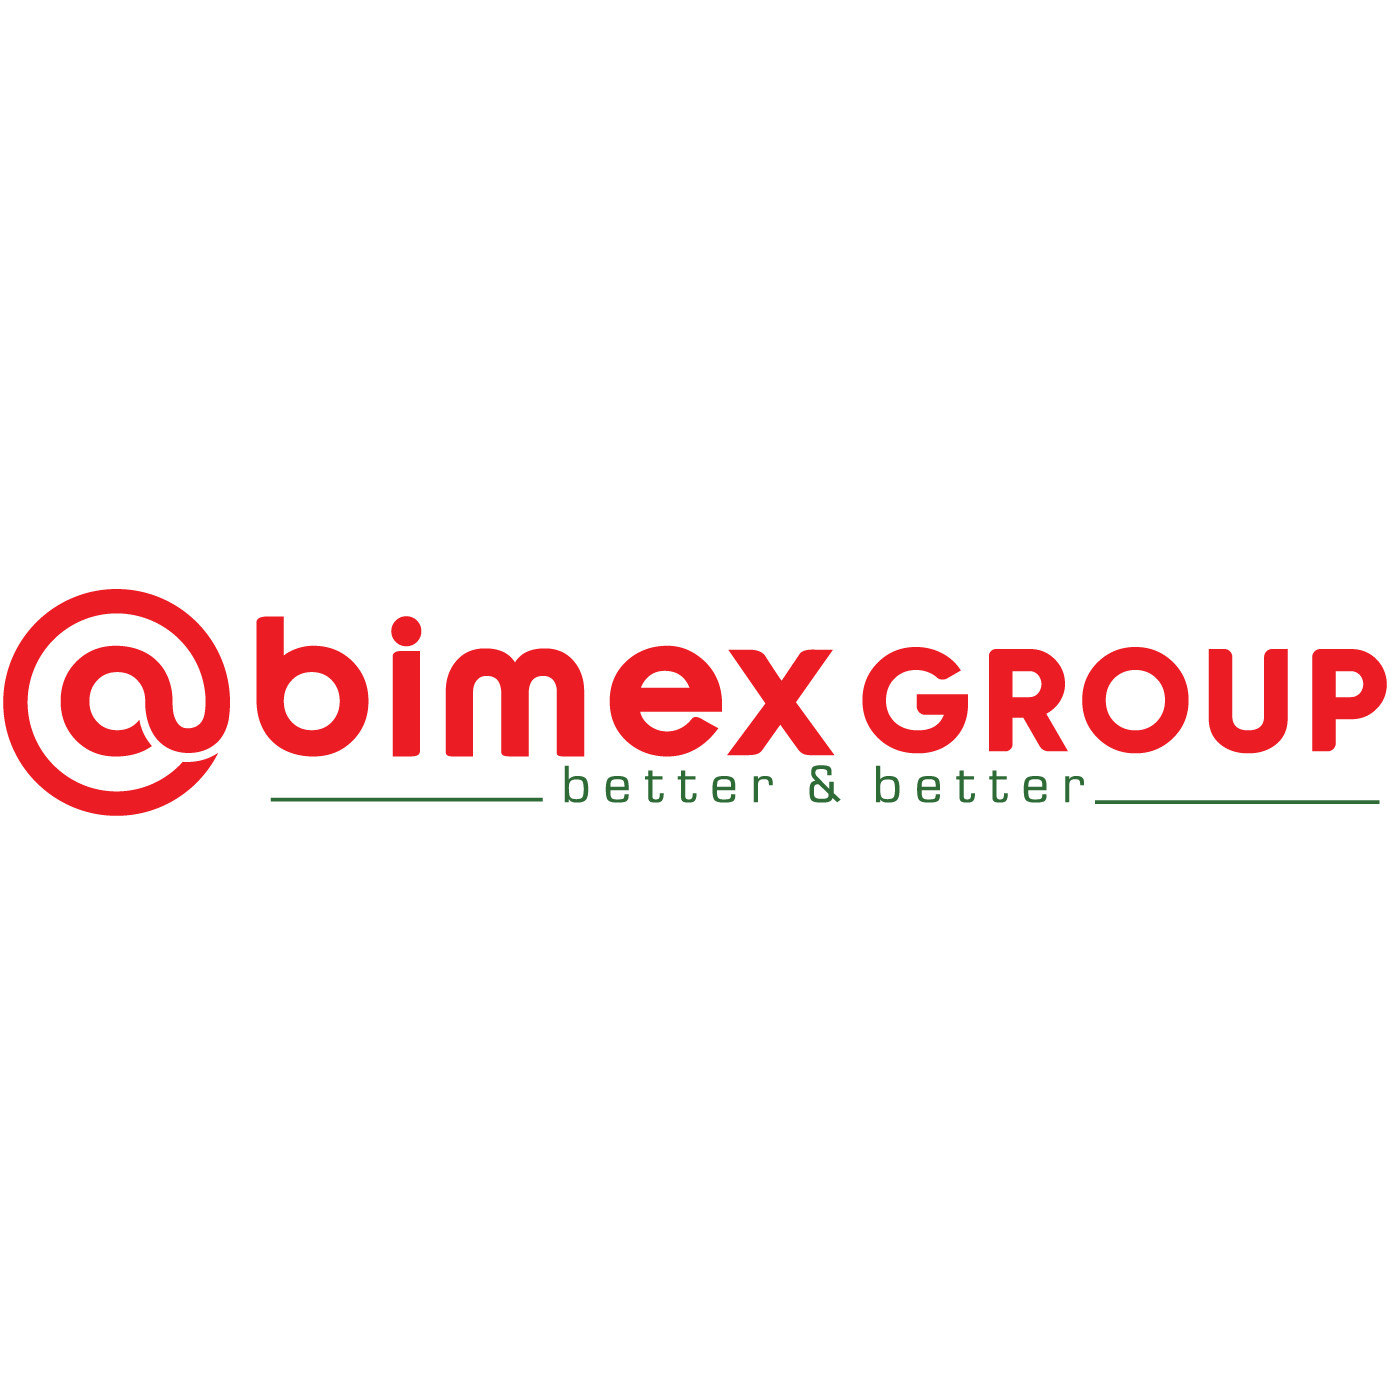 Abimex Group